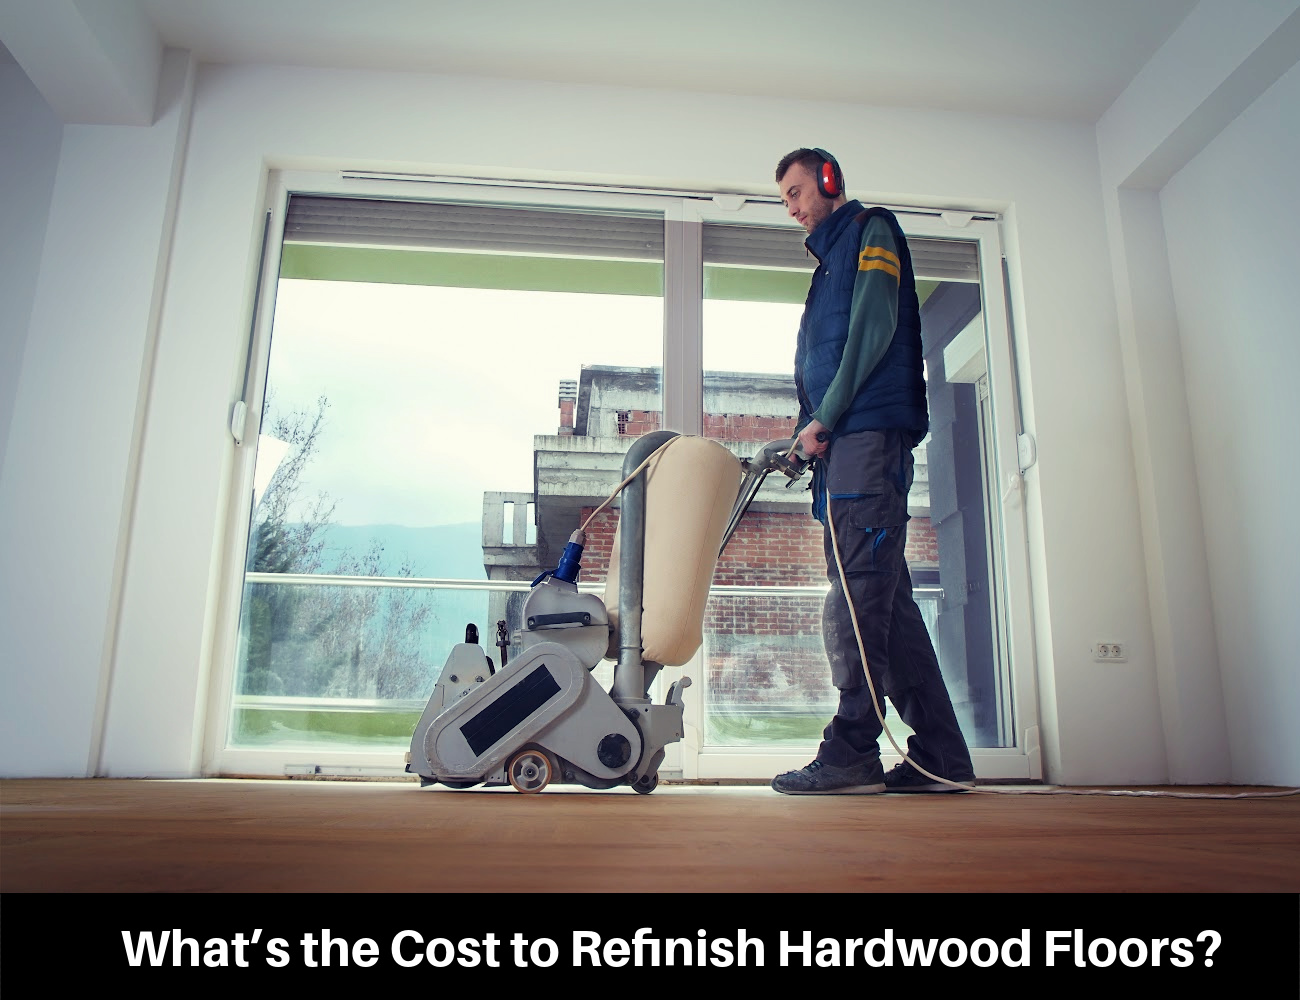 What’s the Cost to Refinish Hardwood Floors?